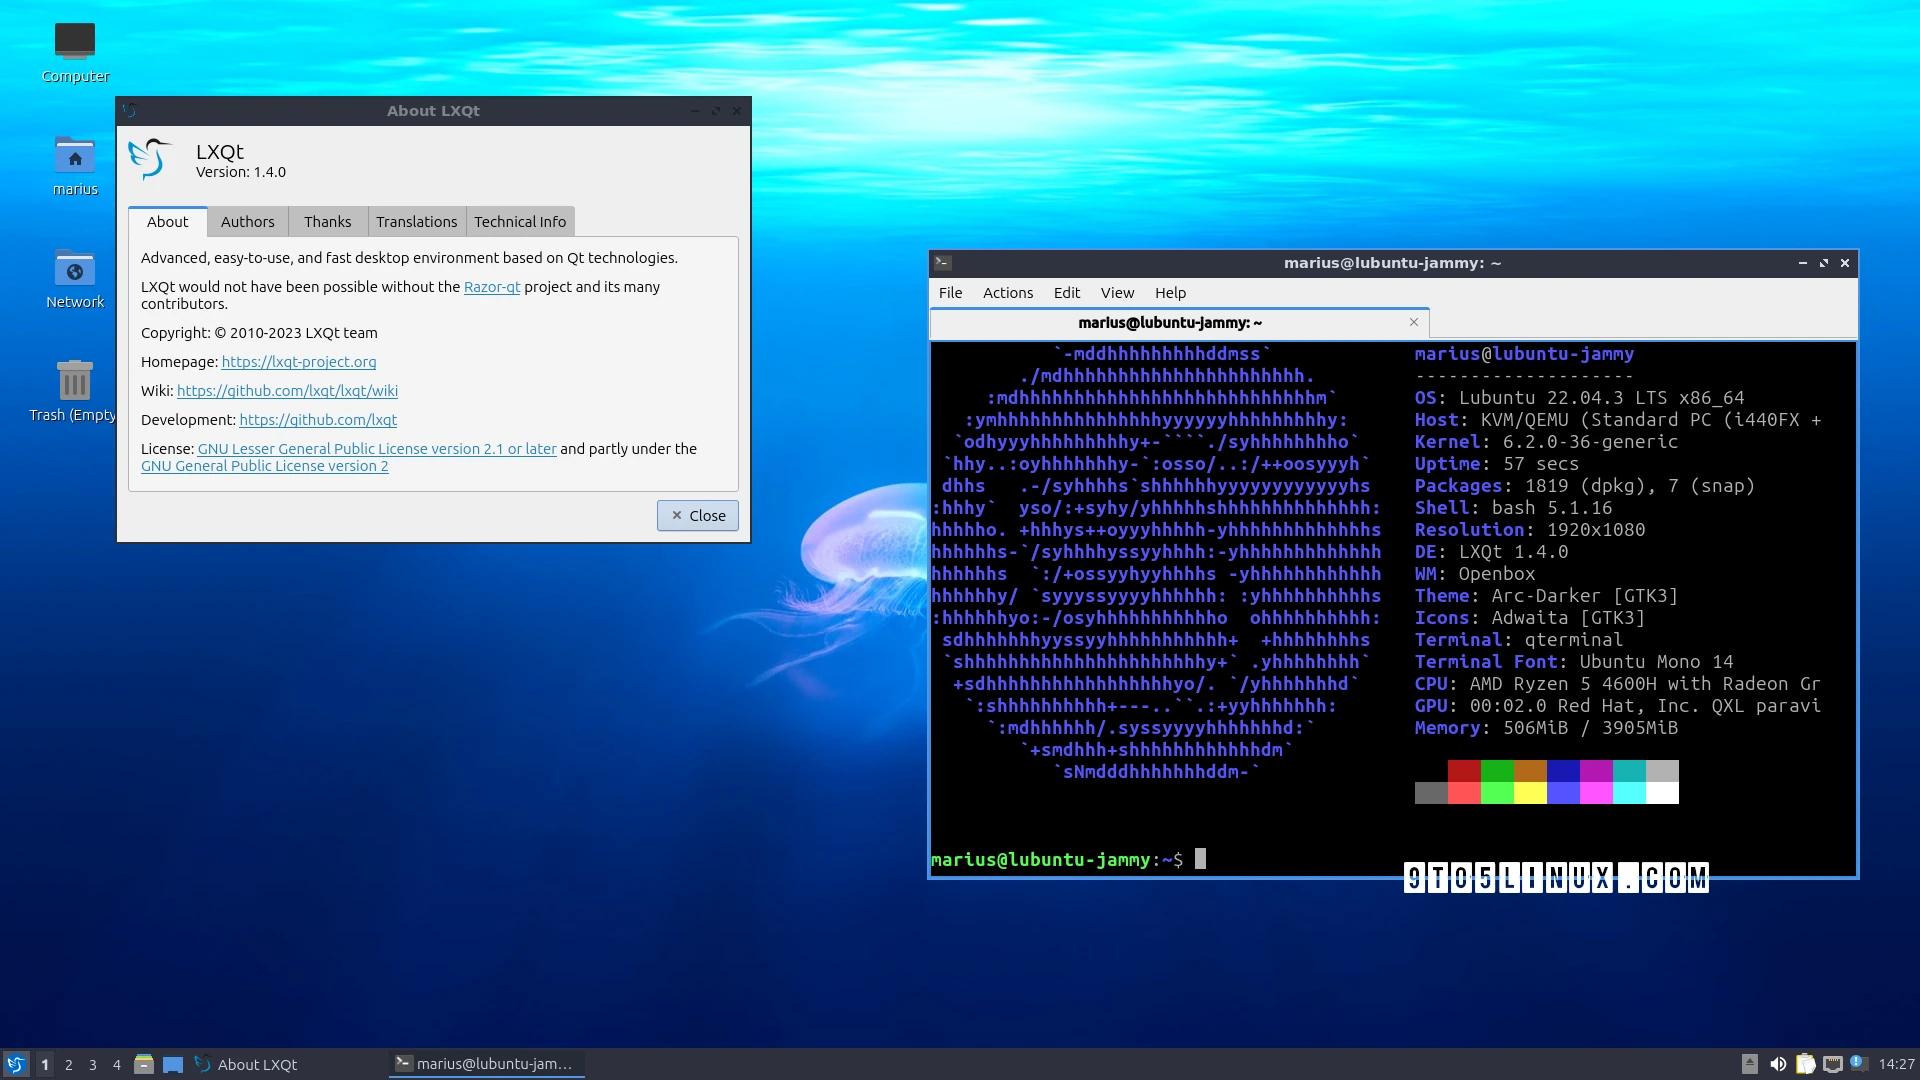 Lubuntu 22.04 LTS Users Can Now Install the LXQt 1.4 Desktop, Here’s How